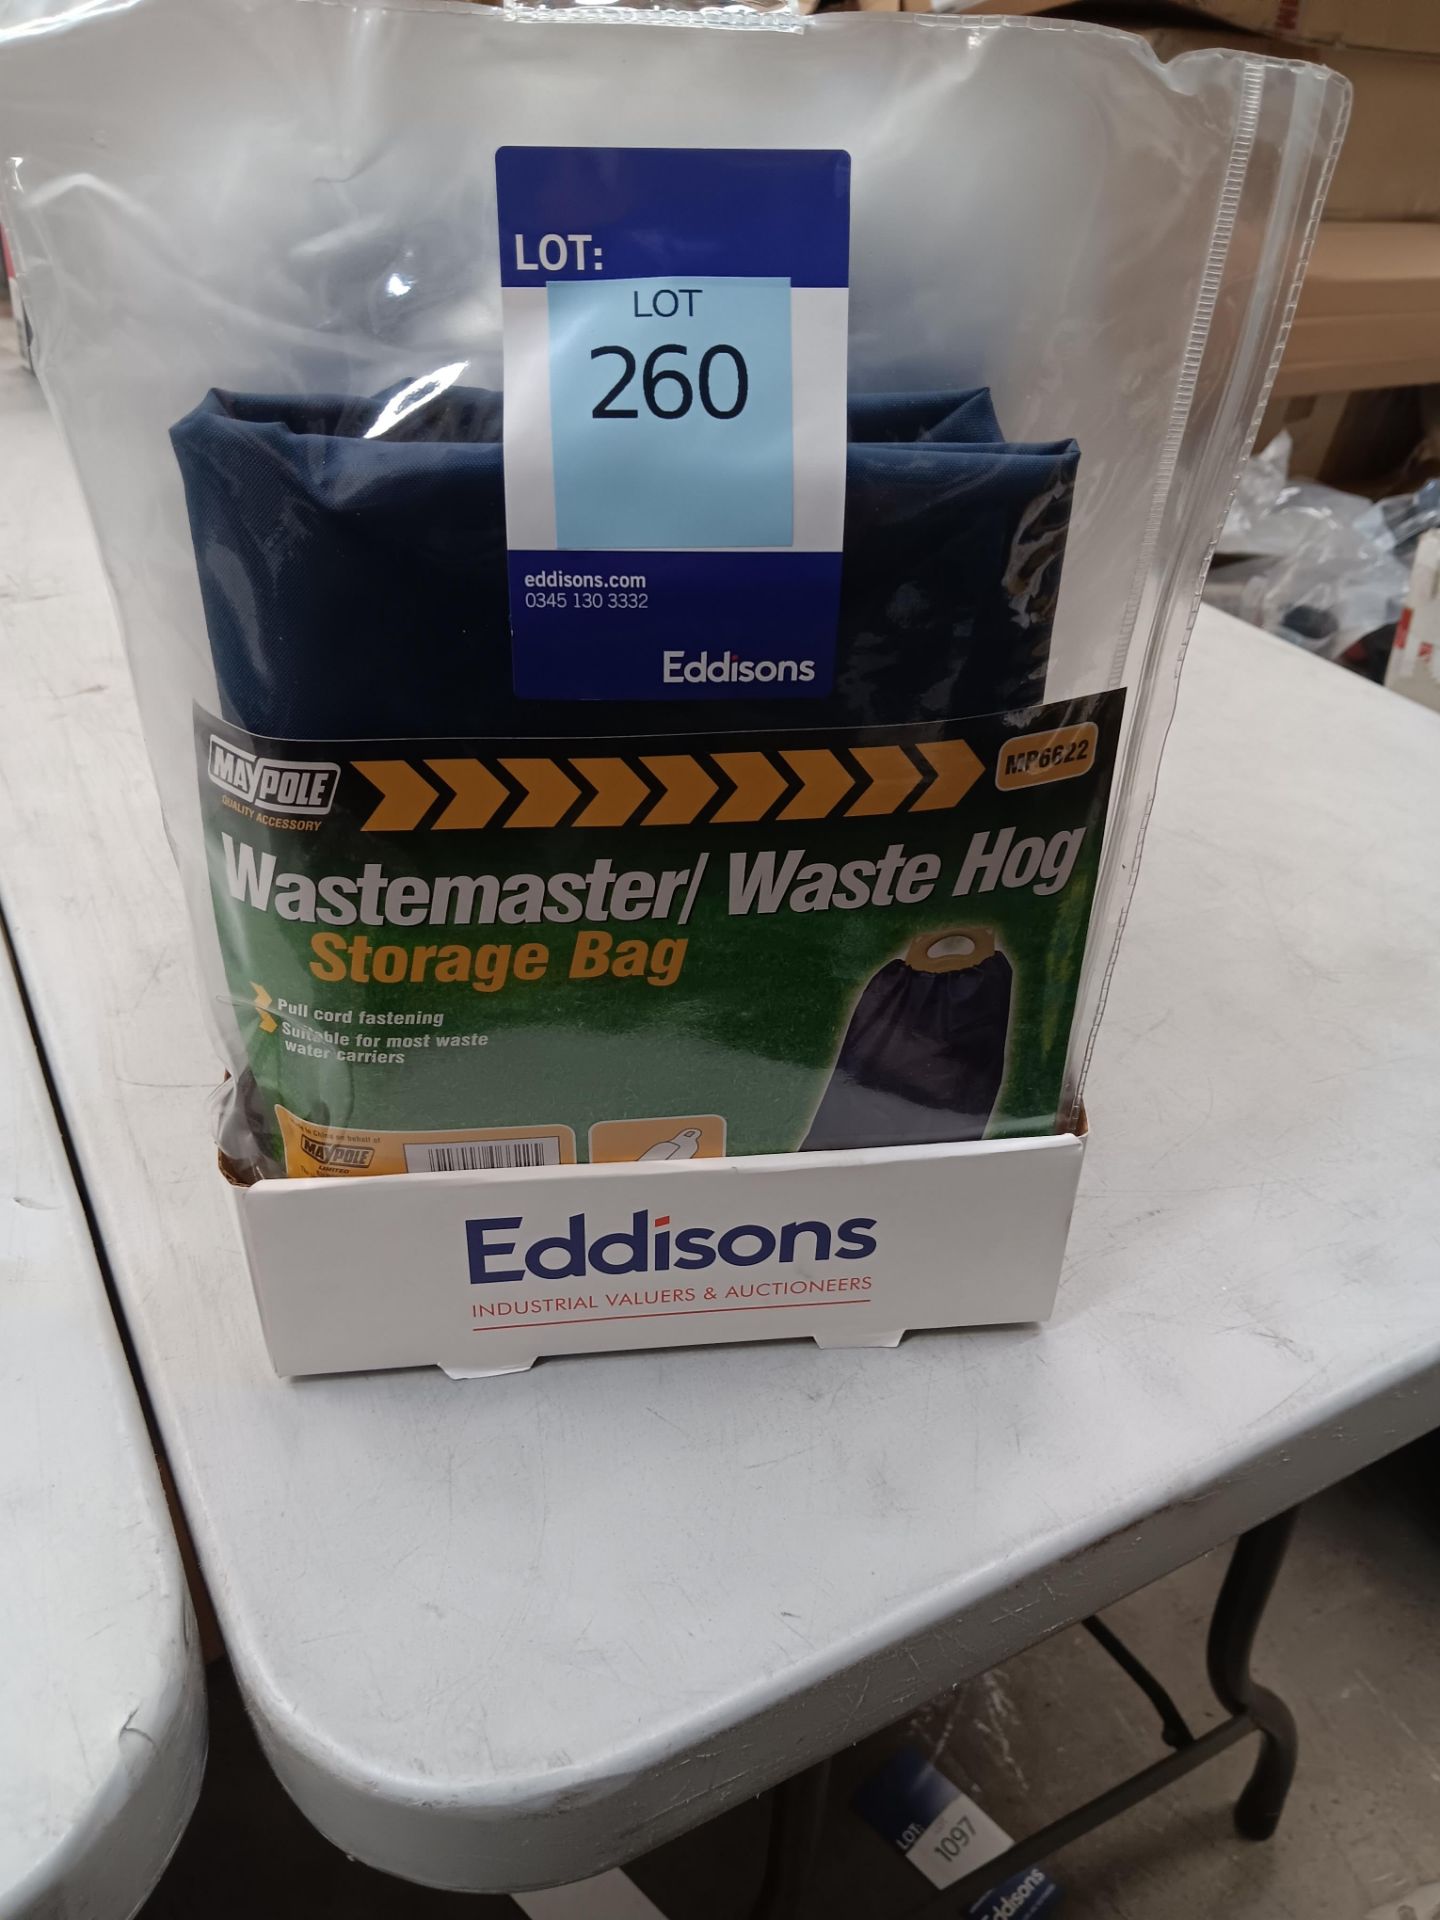 10 x Maypole Wastemaster / Waste Hog Storage Bags (Please note, Viewing Strongly Recommended -